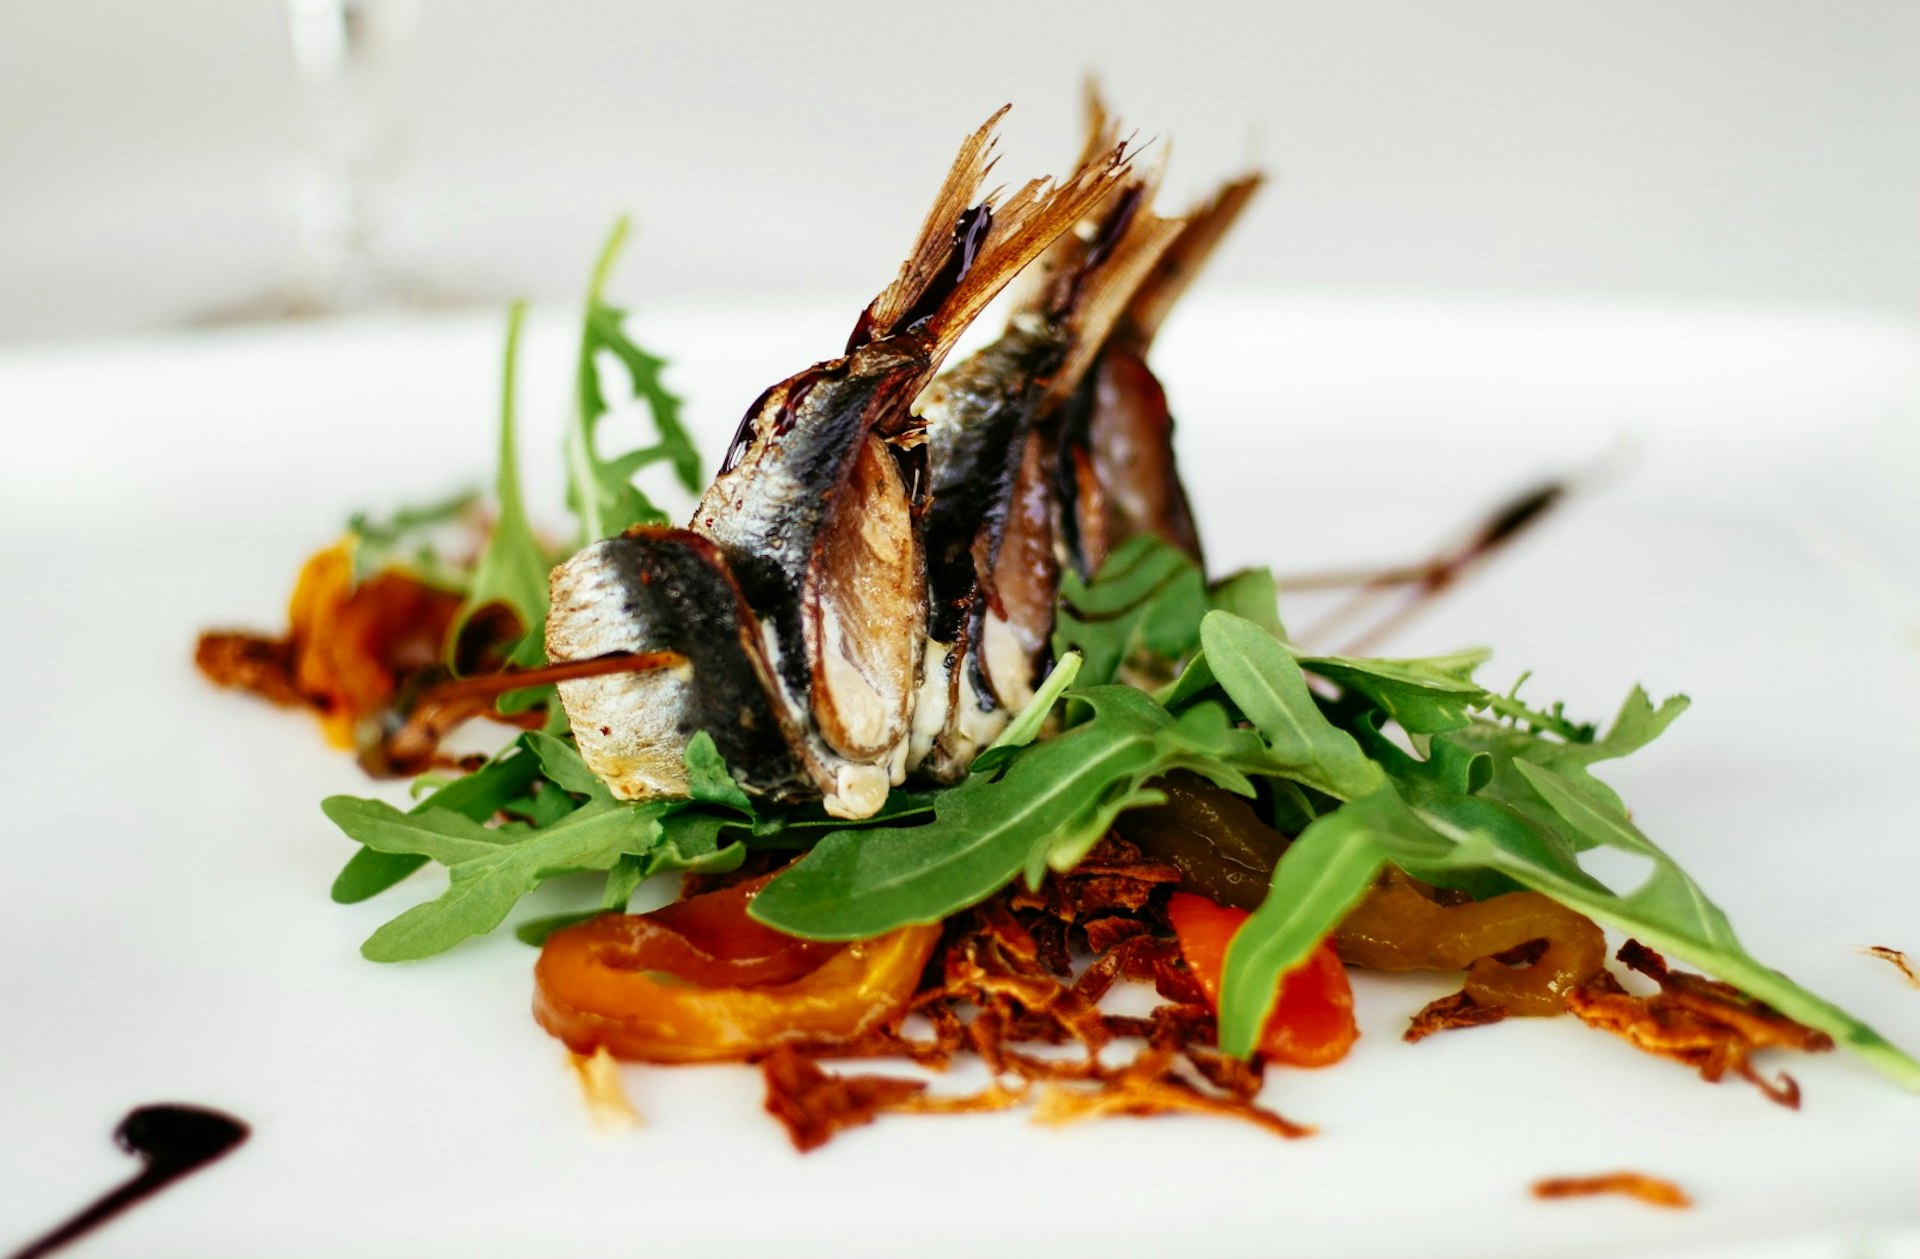 Authentic Portuguese cooking at Girassol. Image © Andra Stefan / Lonely Planet